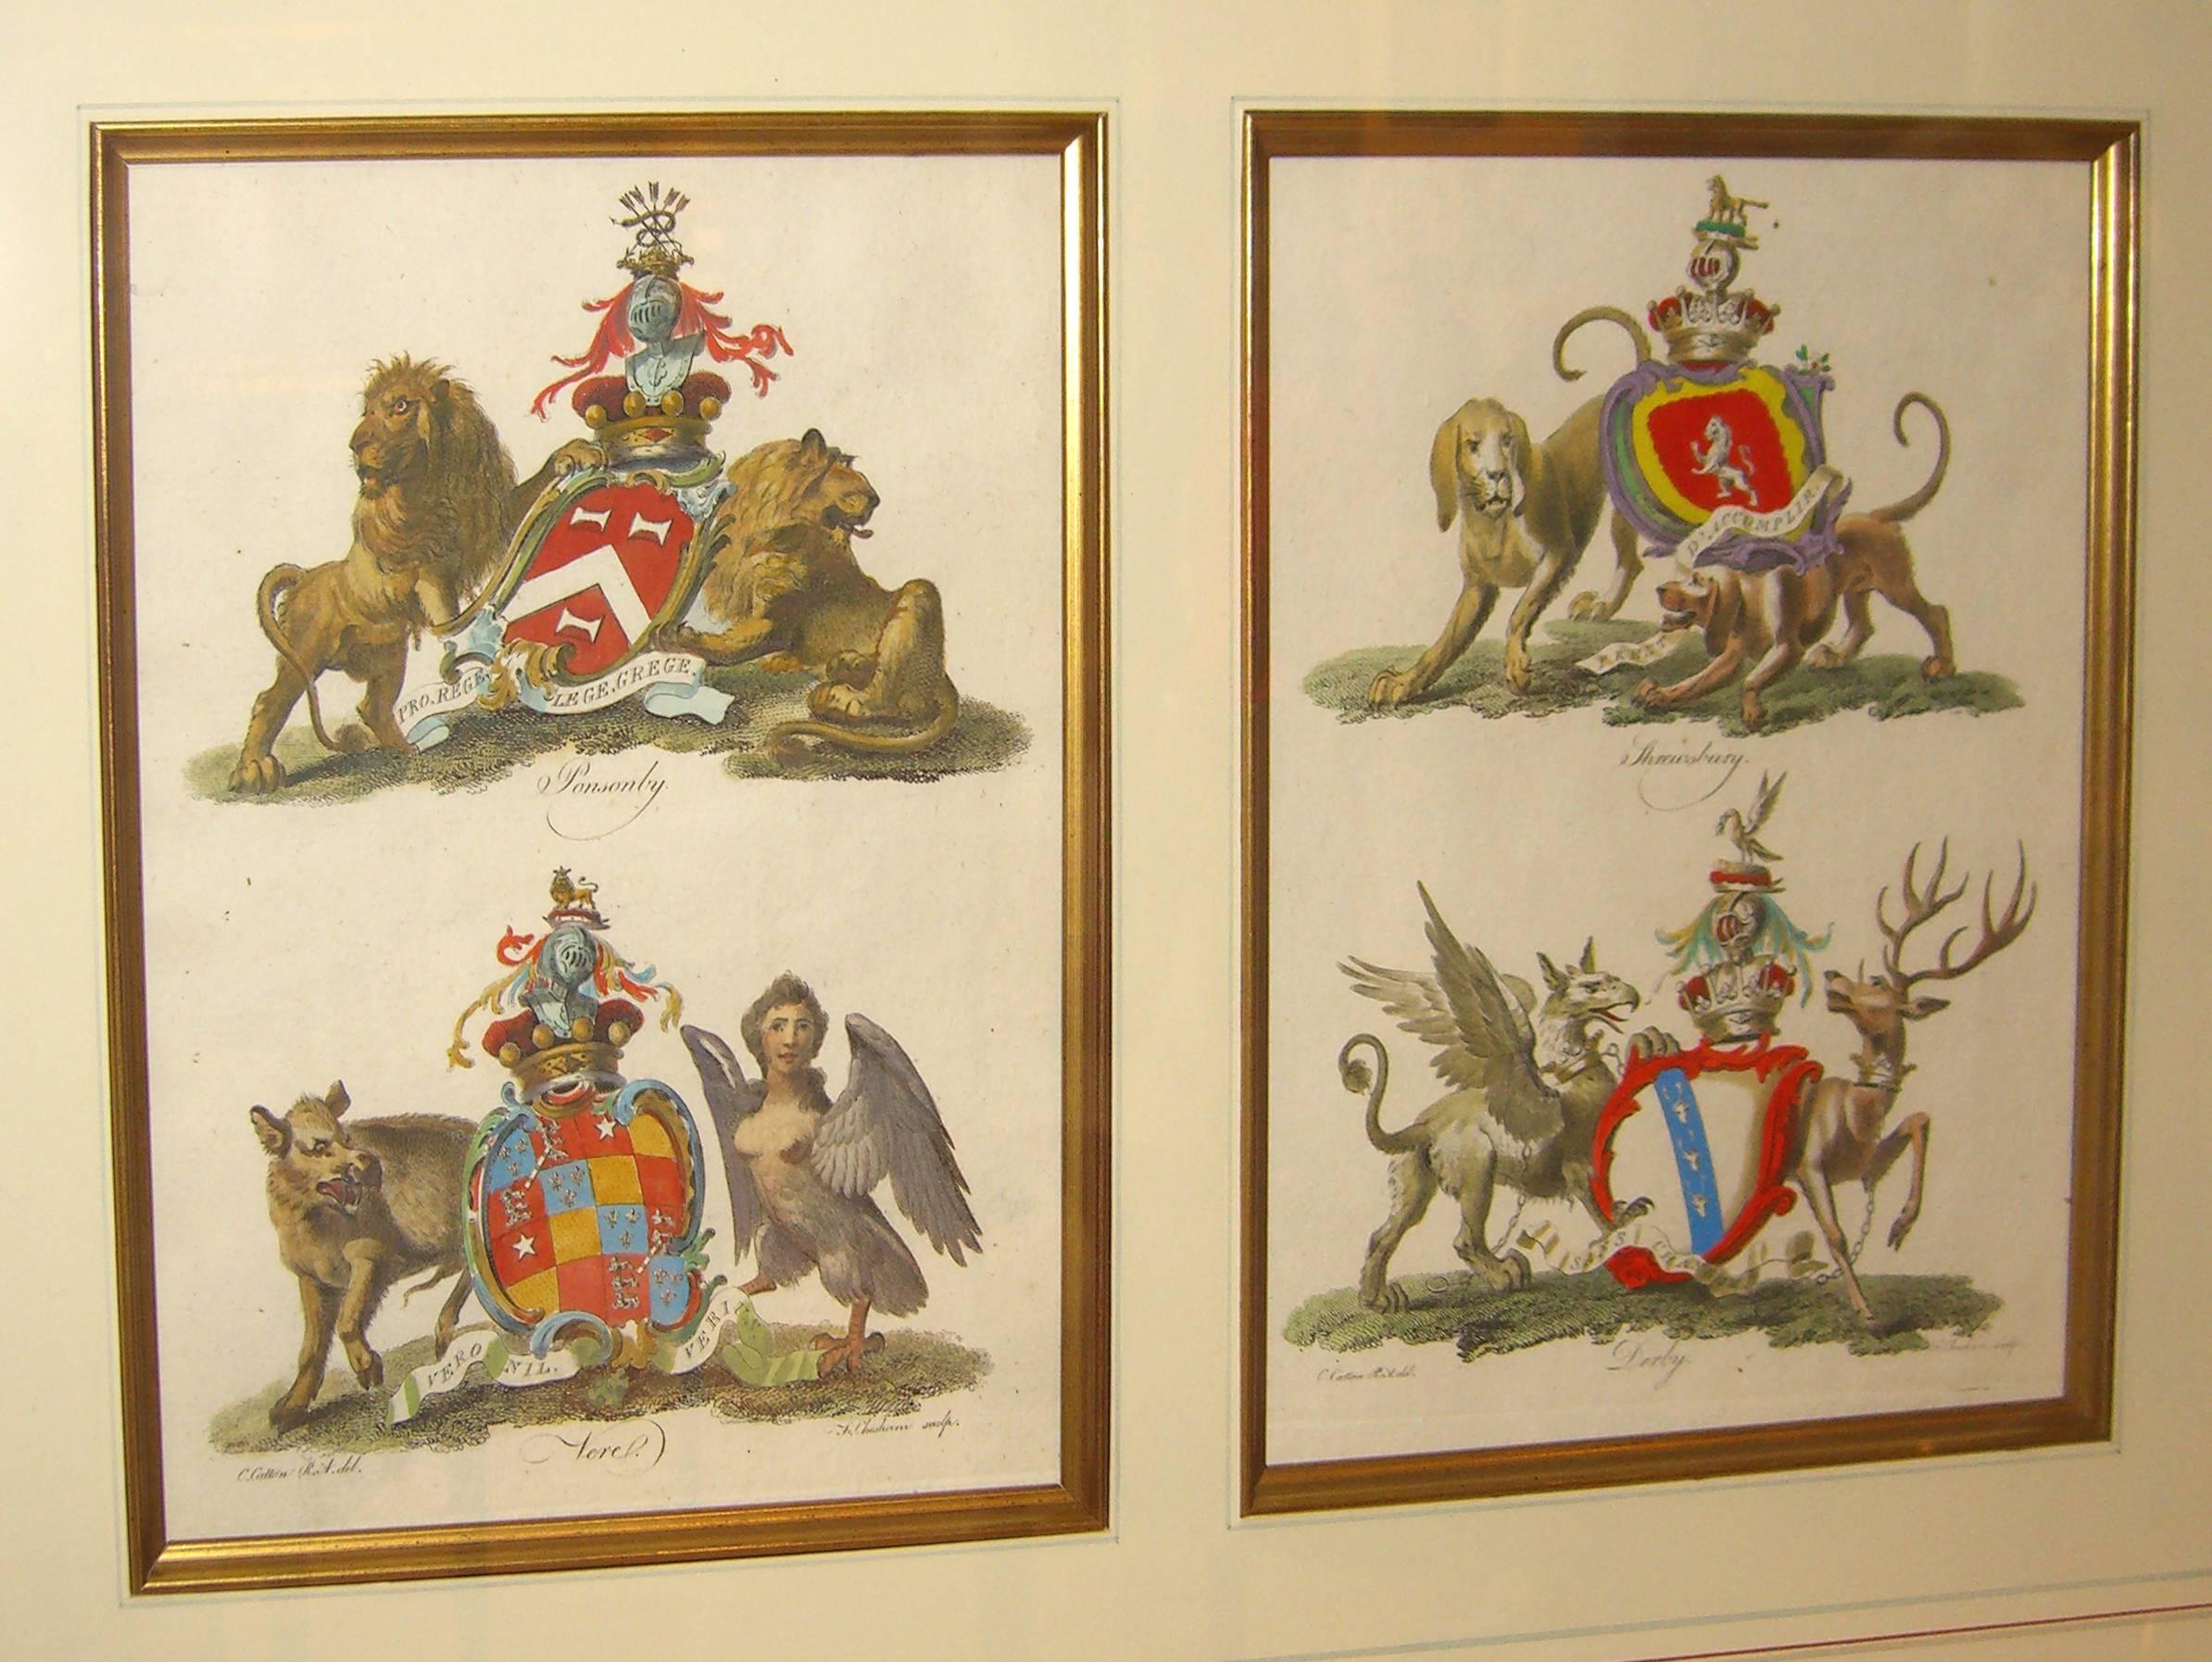 A pair of late 18th century, later hand-colored, Heraldic prints. “English Peerage” published by Christopher Catton, Strand, London.